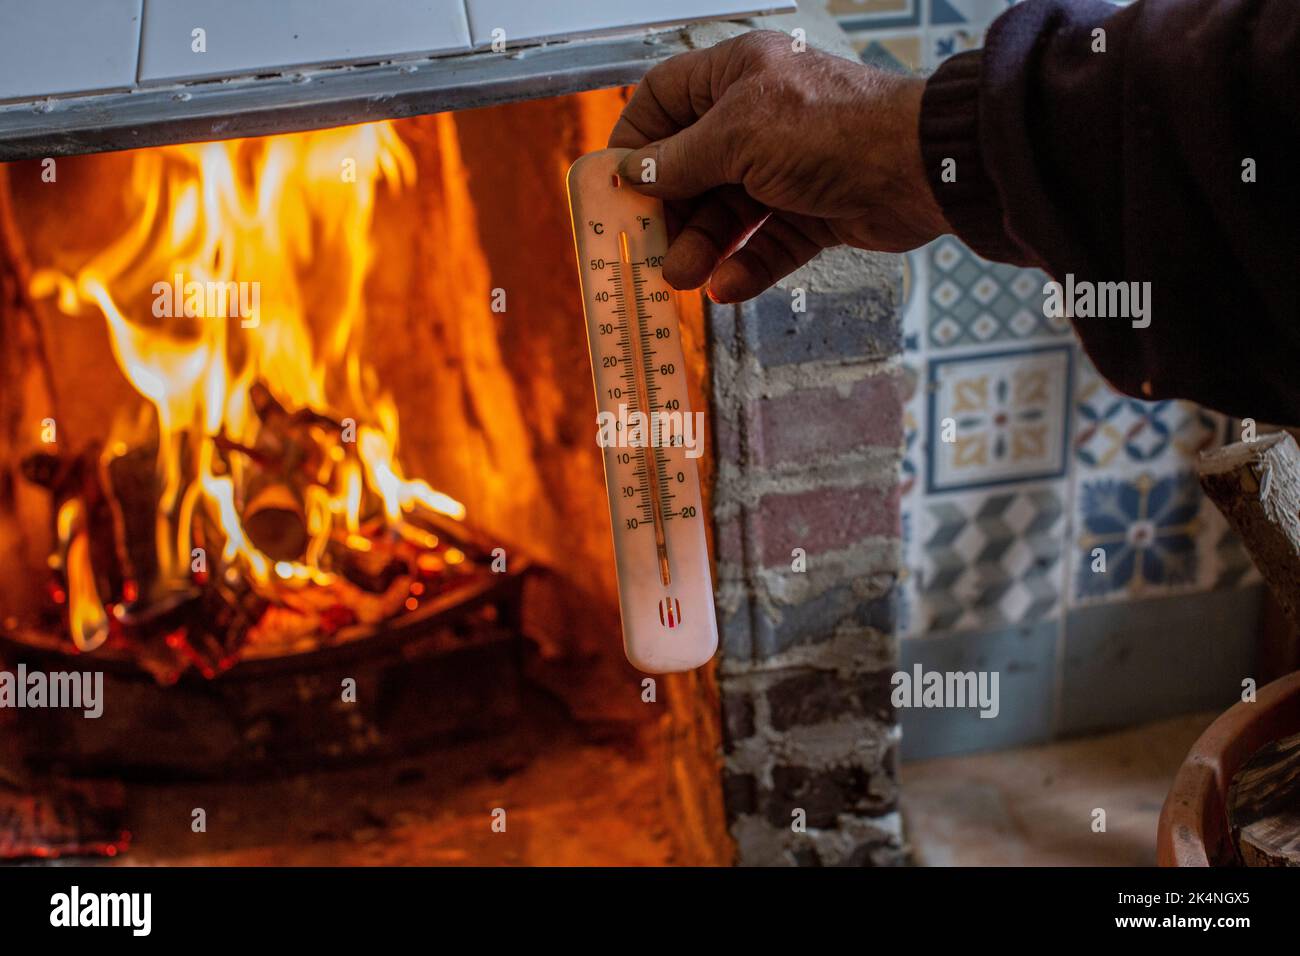 London, UK. Sept 29 2022 .Close up of hand holding a thermometer measuring temperature of fireplace . Stock Photo